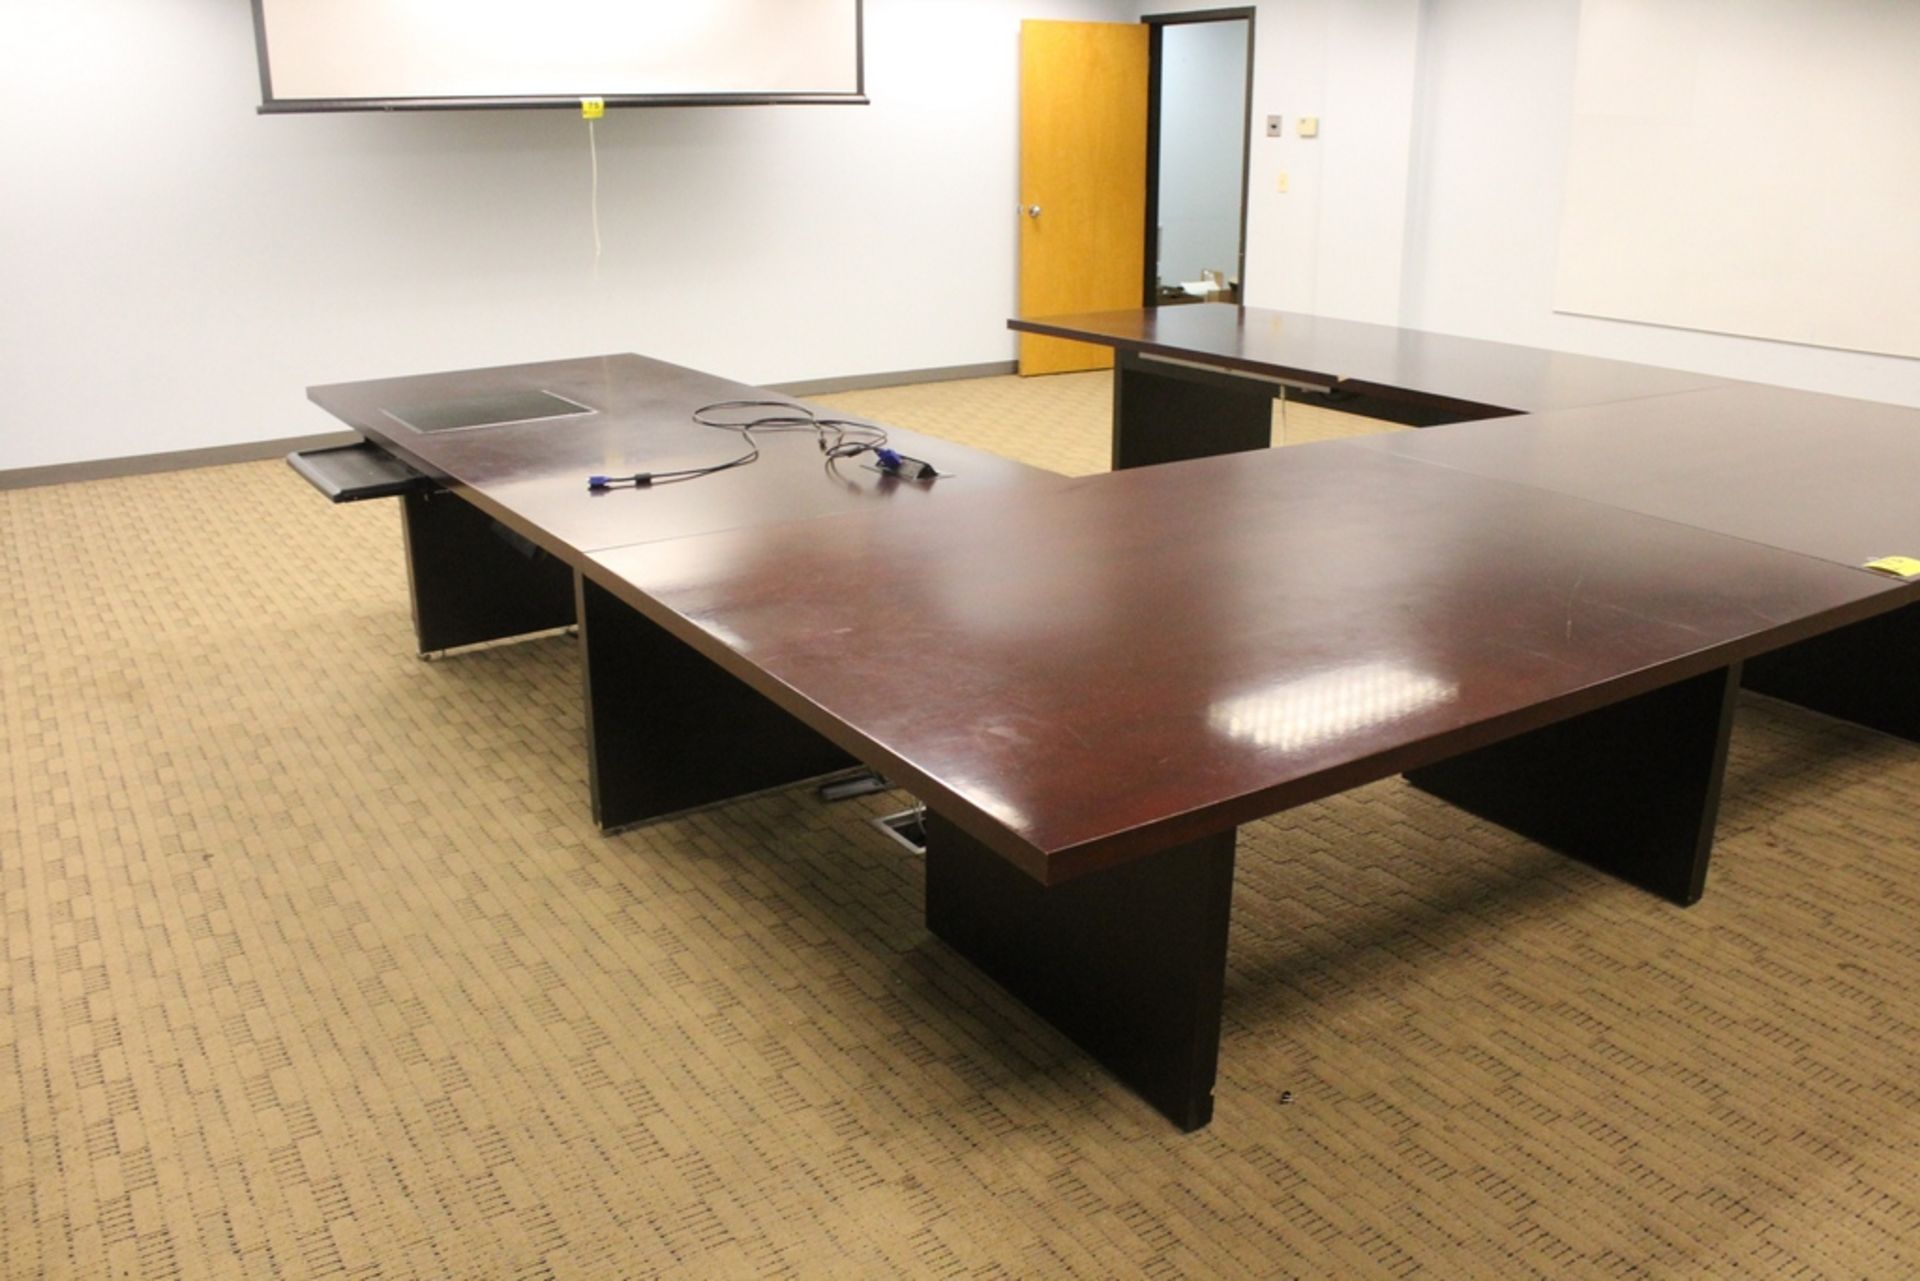 U-SHAPED WOOD CONFERENCE TABLE, 144" X 150" - Image 2 of 4